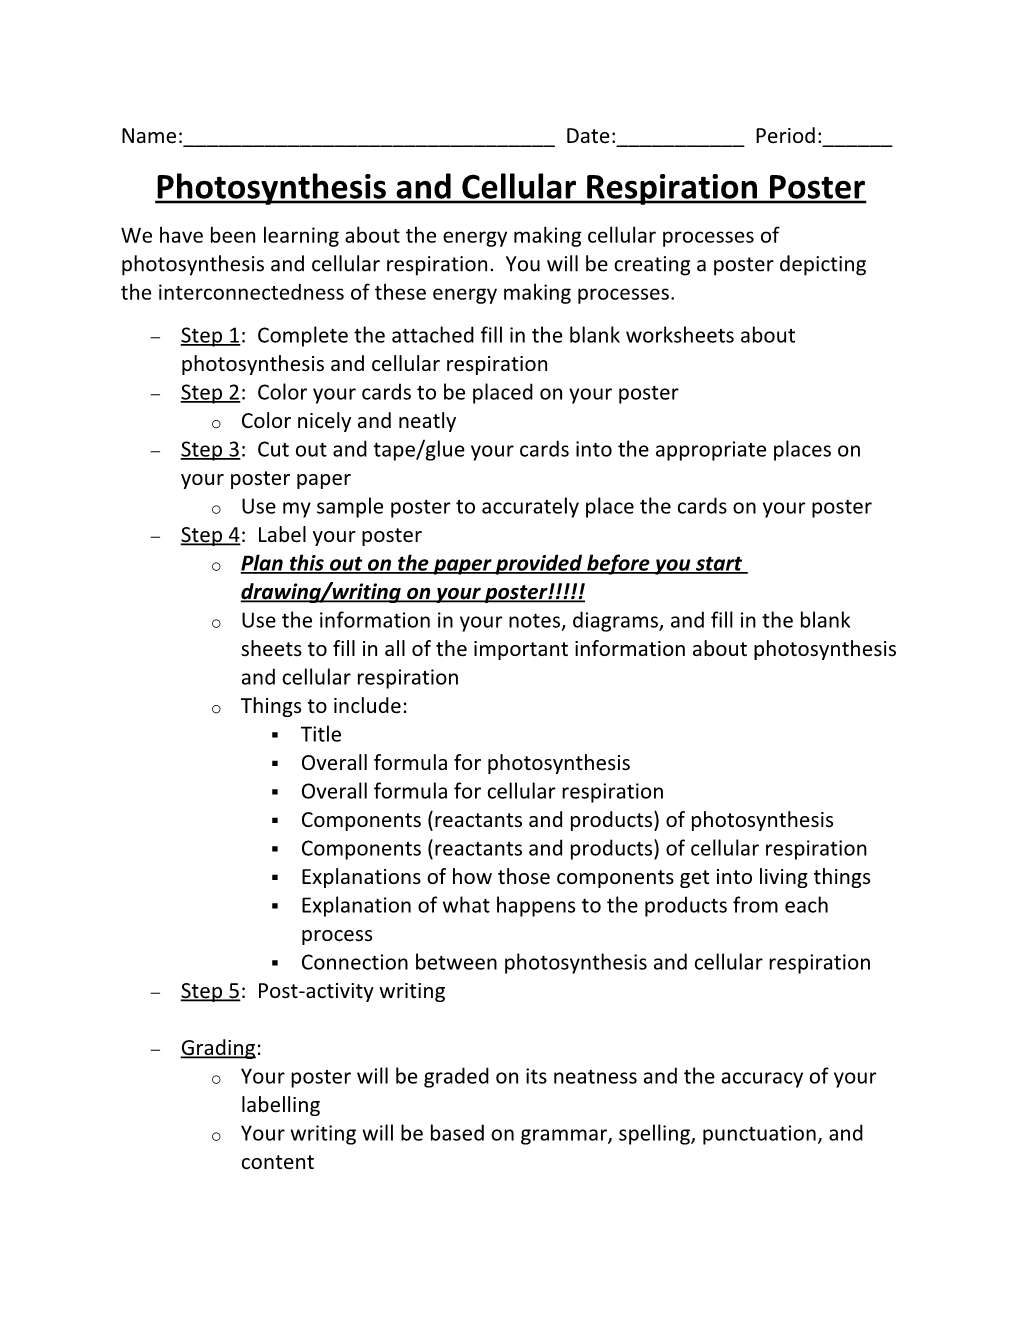 Photosynthesis and Cellular Respiration Poster